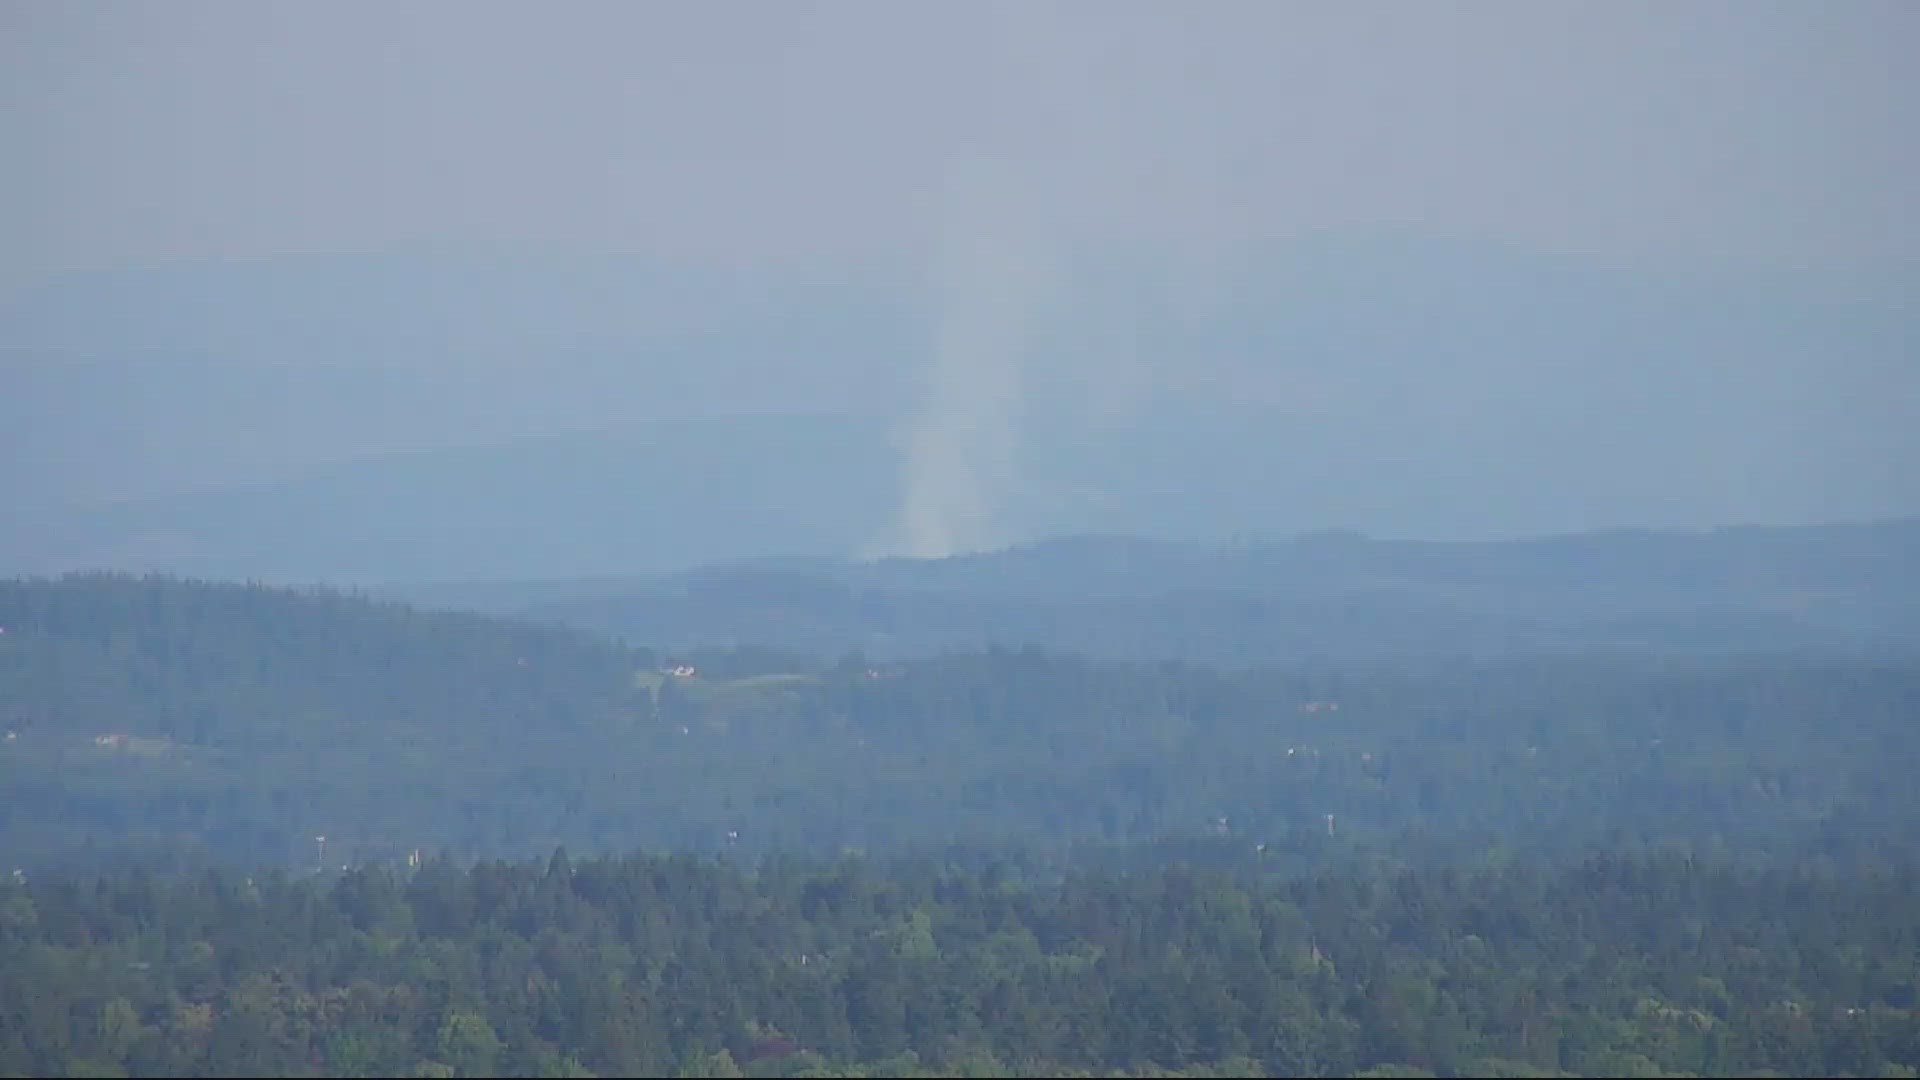 Clackamas Fire officials issued a Level 2 evacuation notice for anyone within a half mile radius of the fire near Beavercreek.